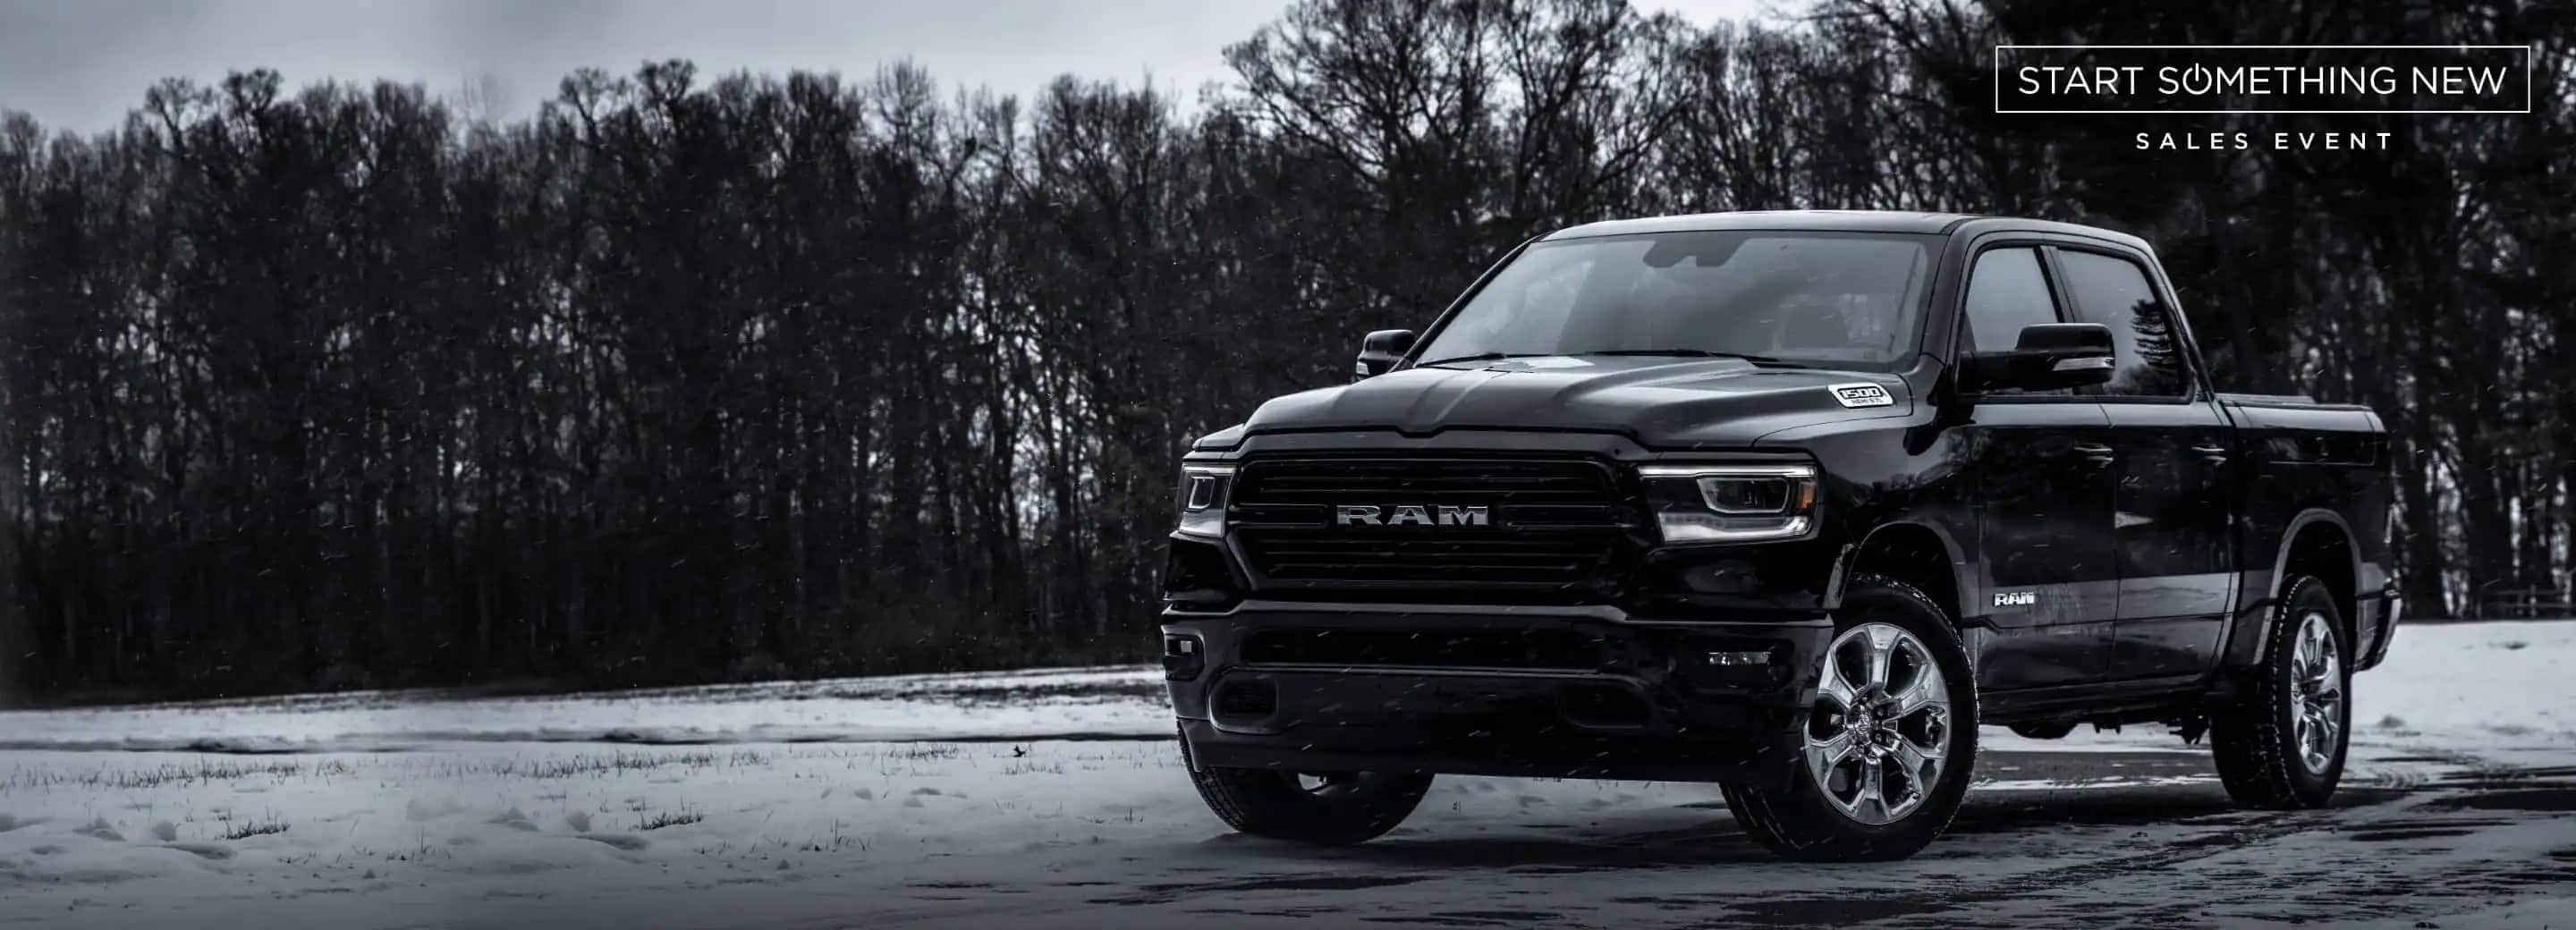 A 2022 Ram 1500 Big Horn 4x4 parked on a snow-covered clearing in the woods. The Start Something New Sales Event logo.